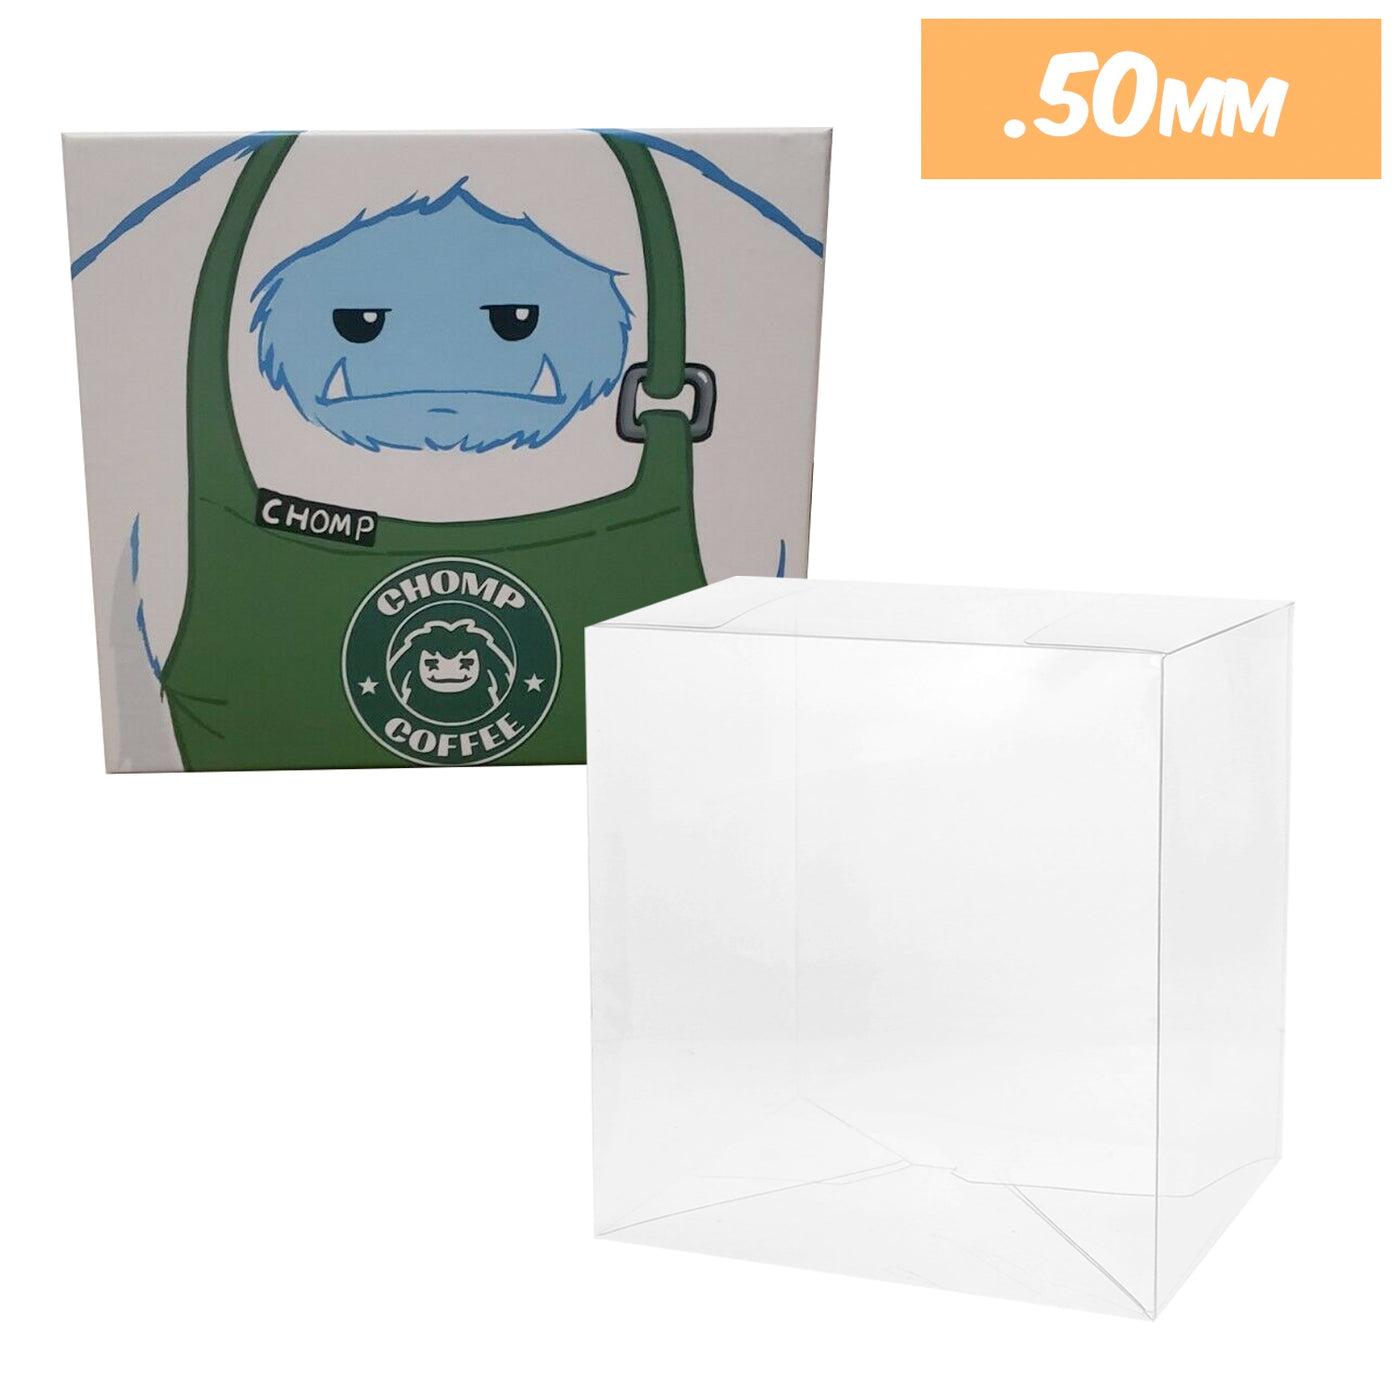 CHOMP BARISTA Protectors for Abominable Toys Vinyl Collectible Figures (50mm thick) 6.5h x 7.75w x 5d